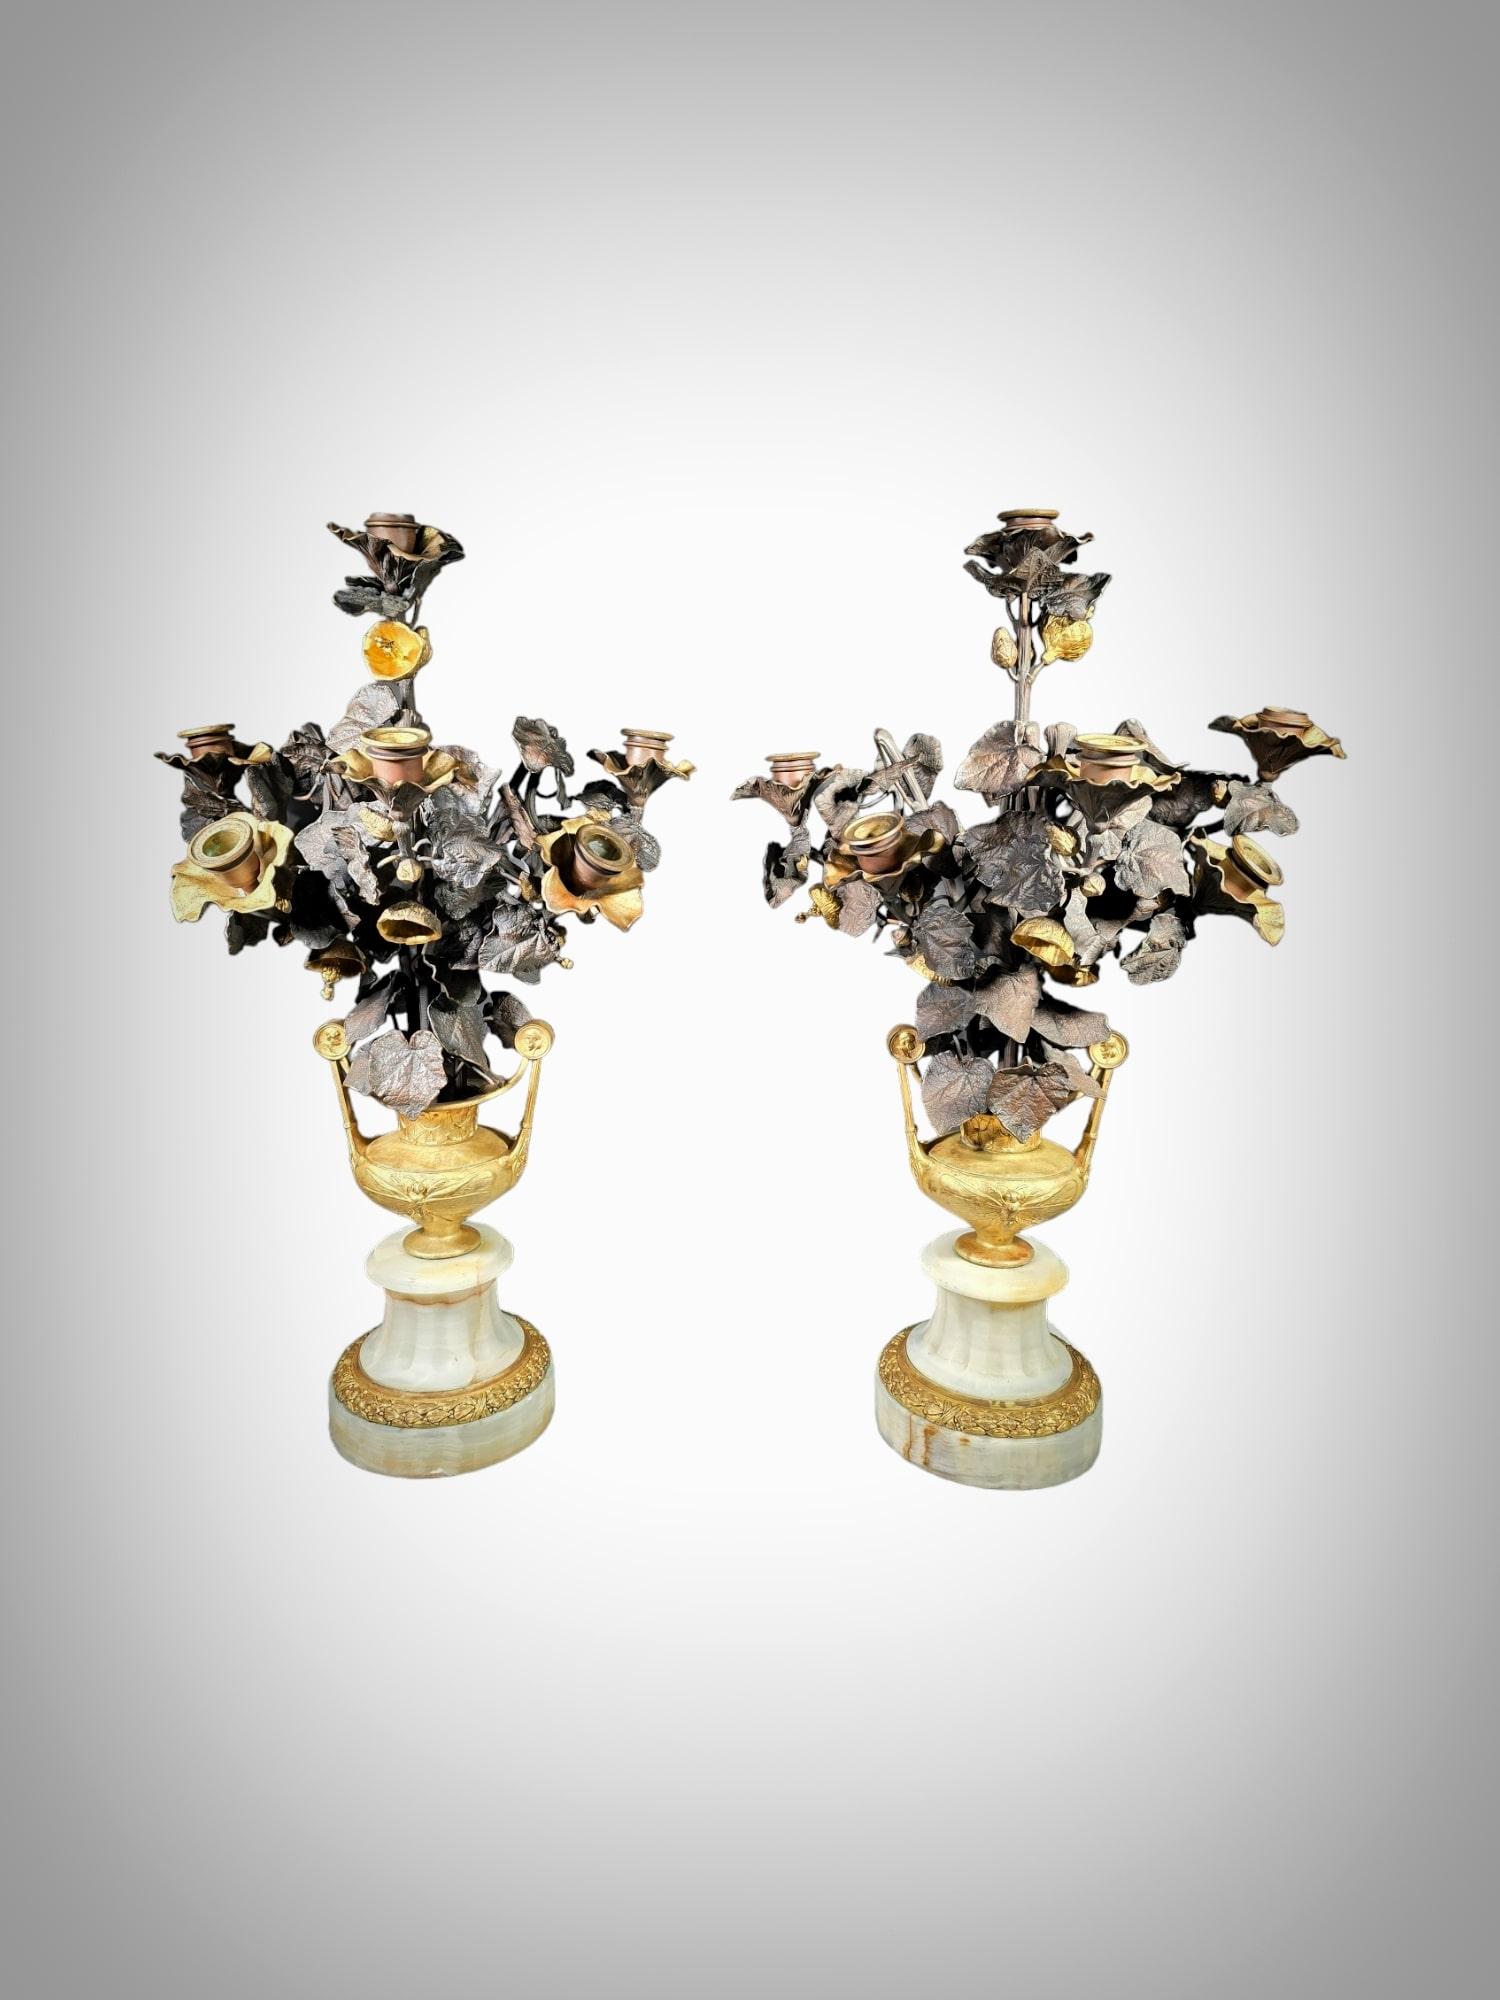 Stunning Gilt Bronze Vases with Flowers, Possibly Italian from the 19th Century For Sale 2